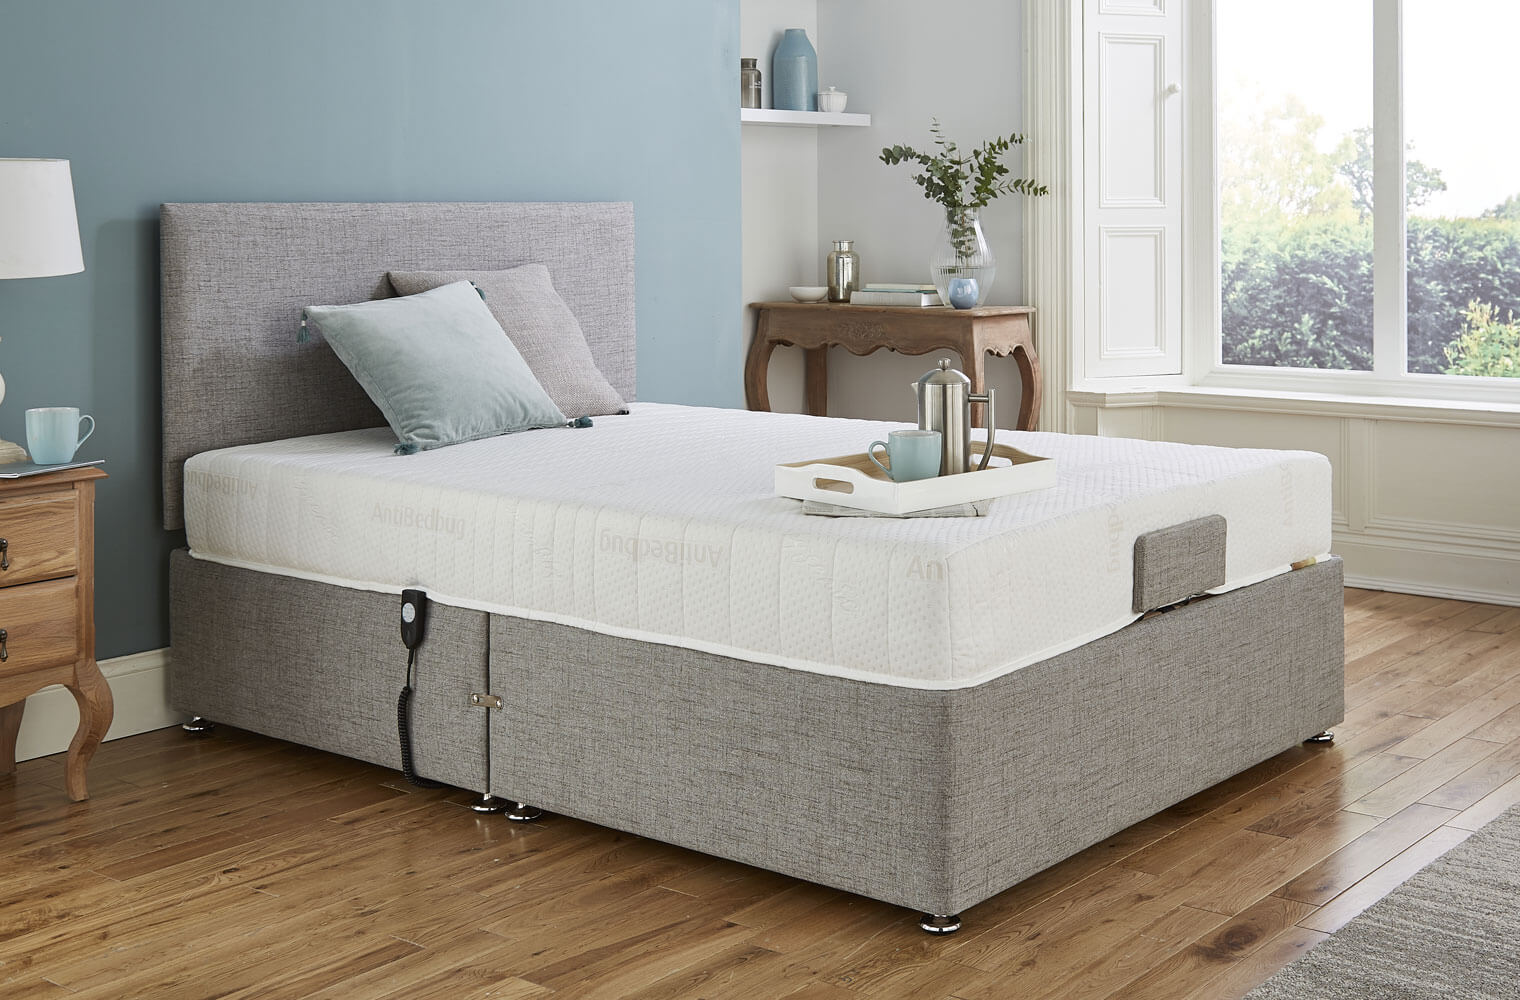 An image of Middletons Netherby Classic Fully Adjustable Automatic Bed with Remote Control D...